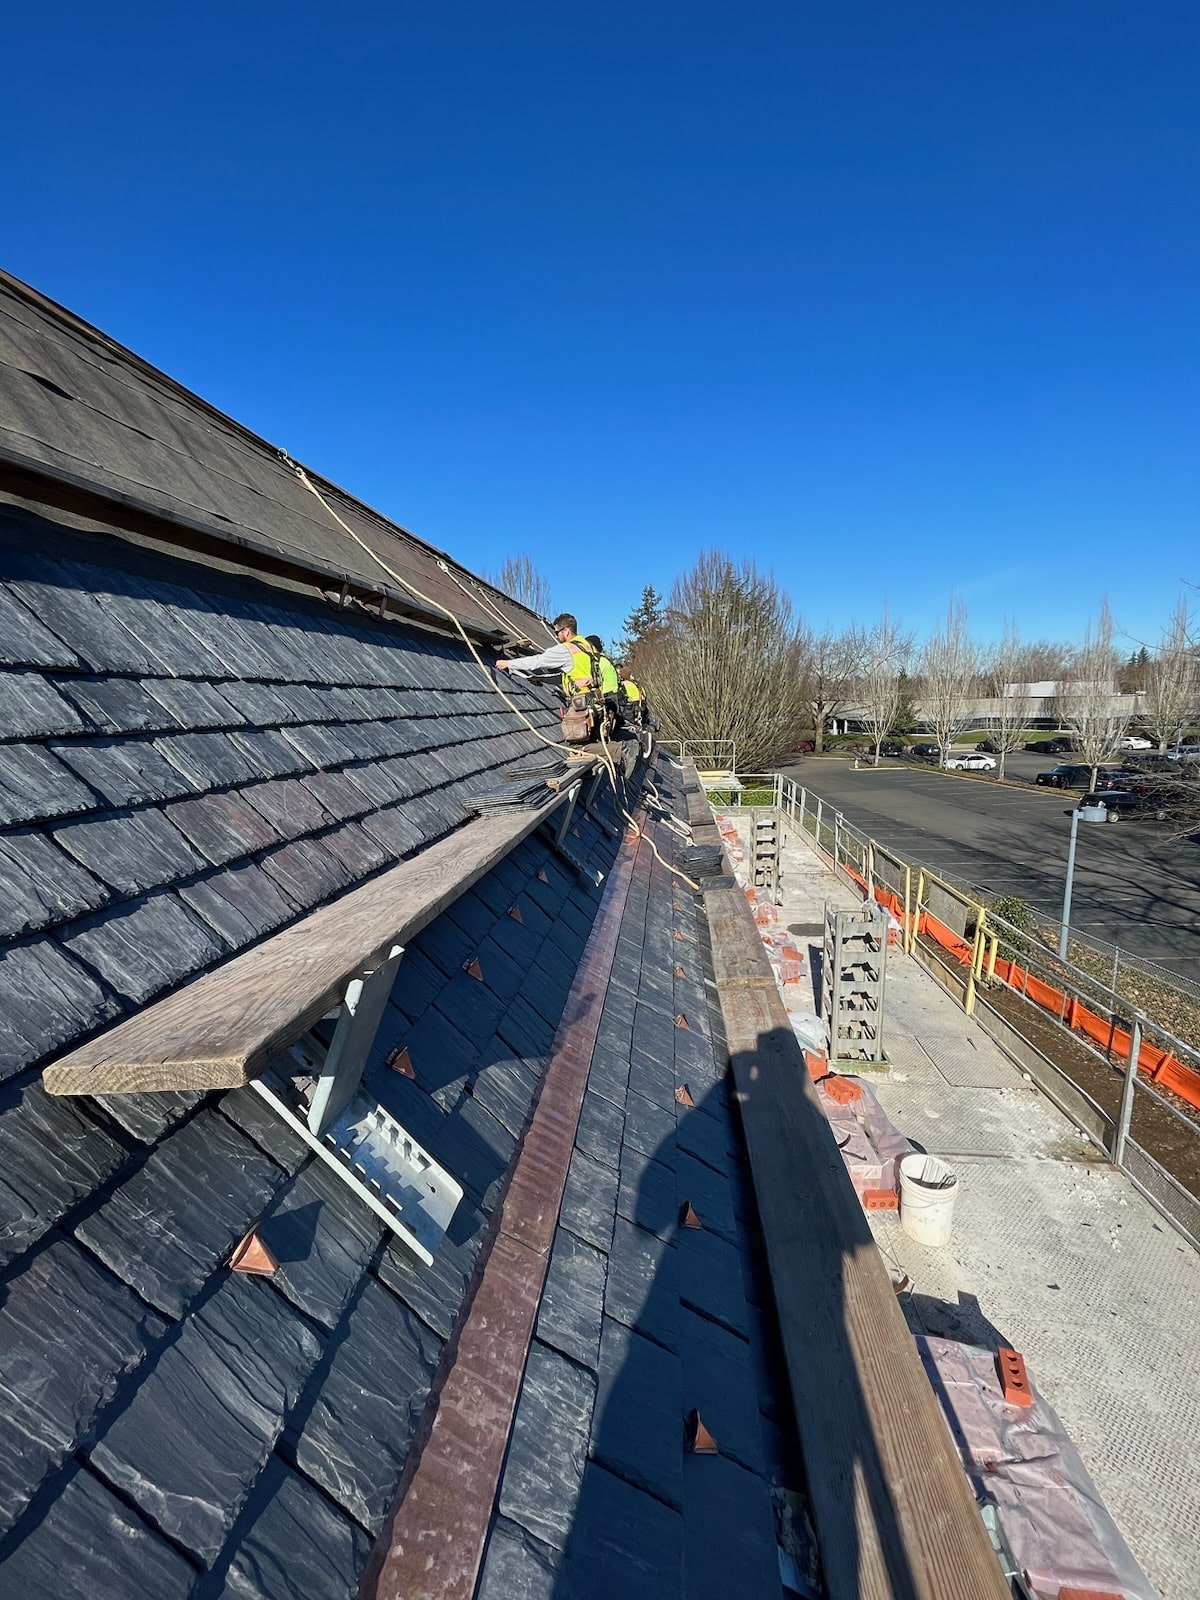 You are currently viewing Slate Roofing in Vancouver, Washington